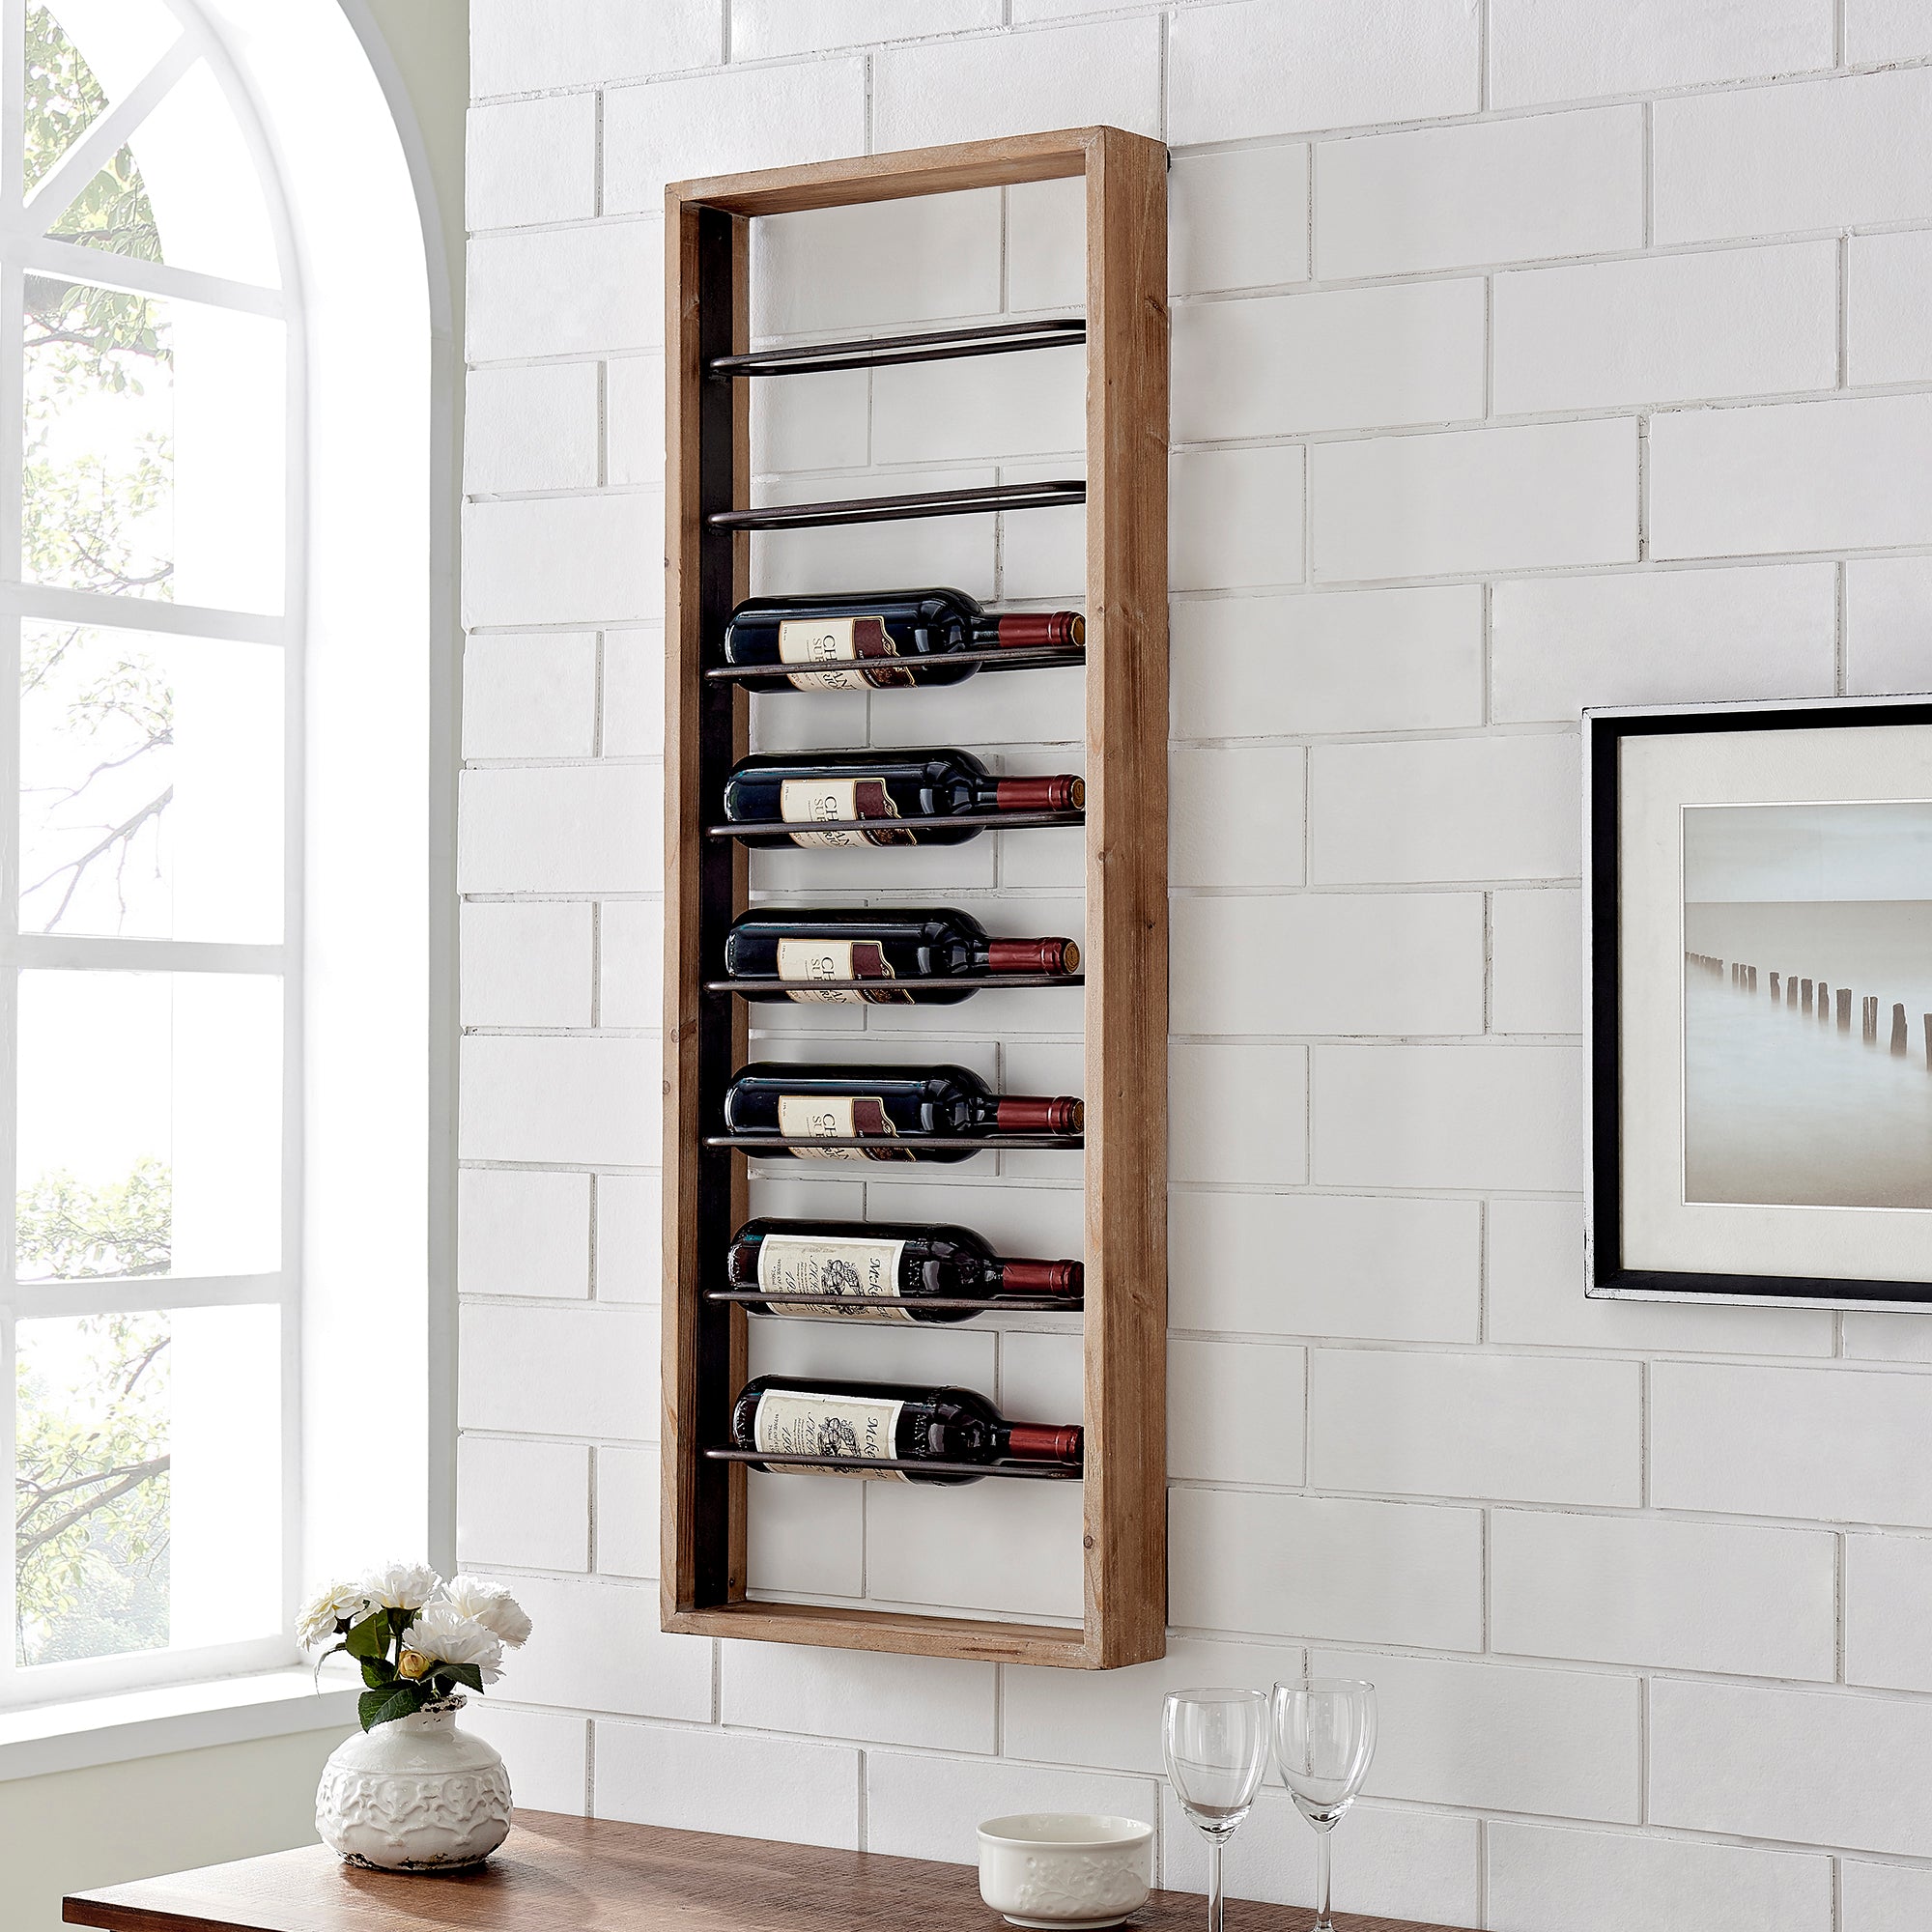 Brown wine rack with a ladder design